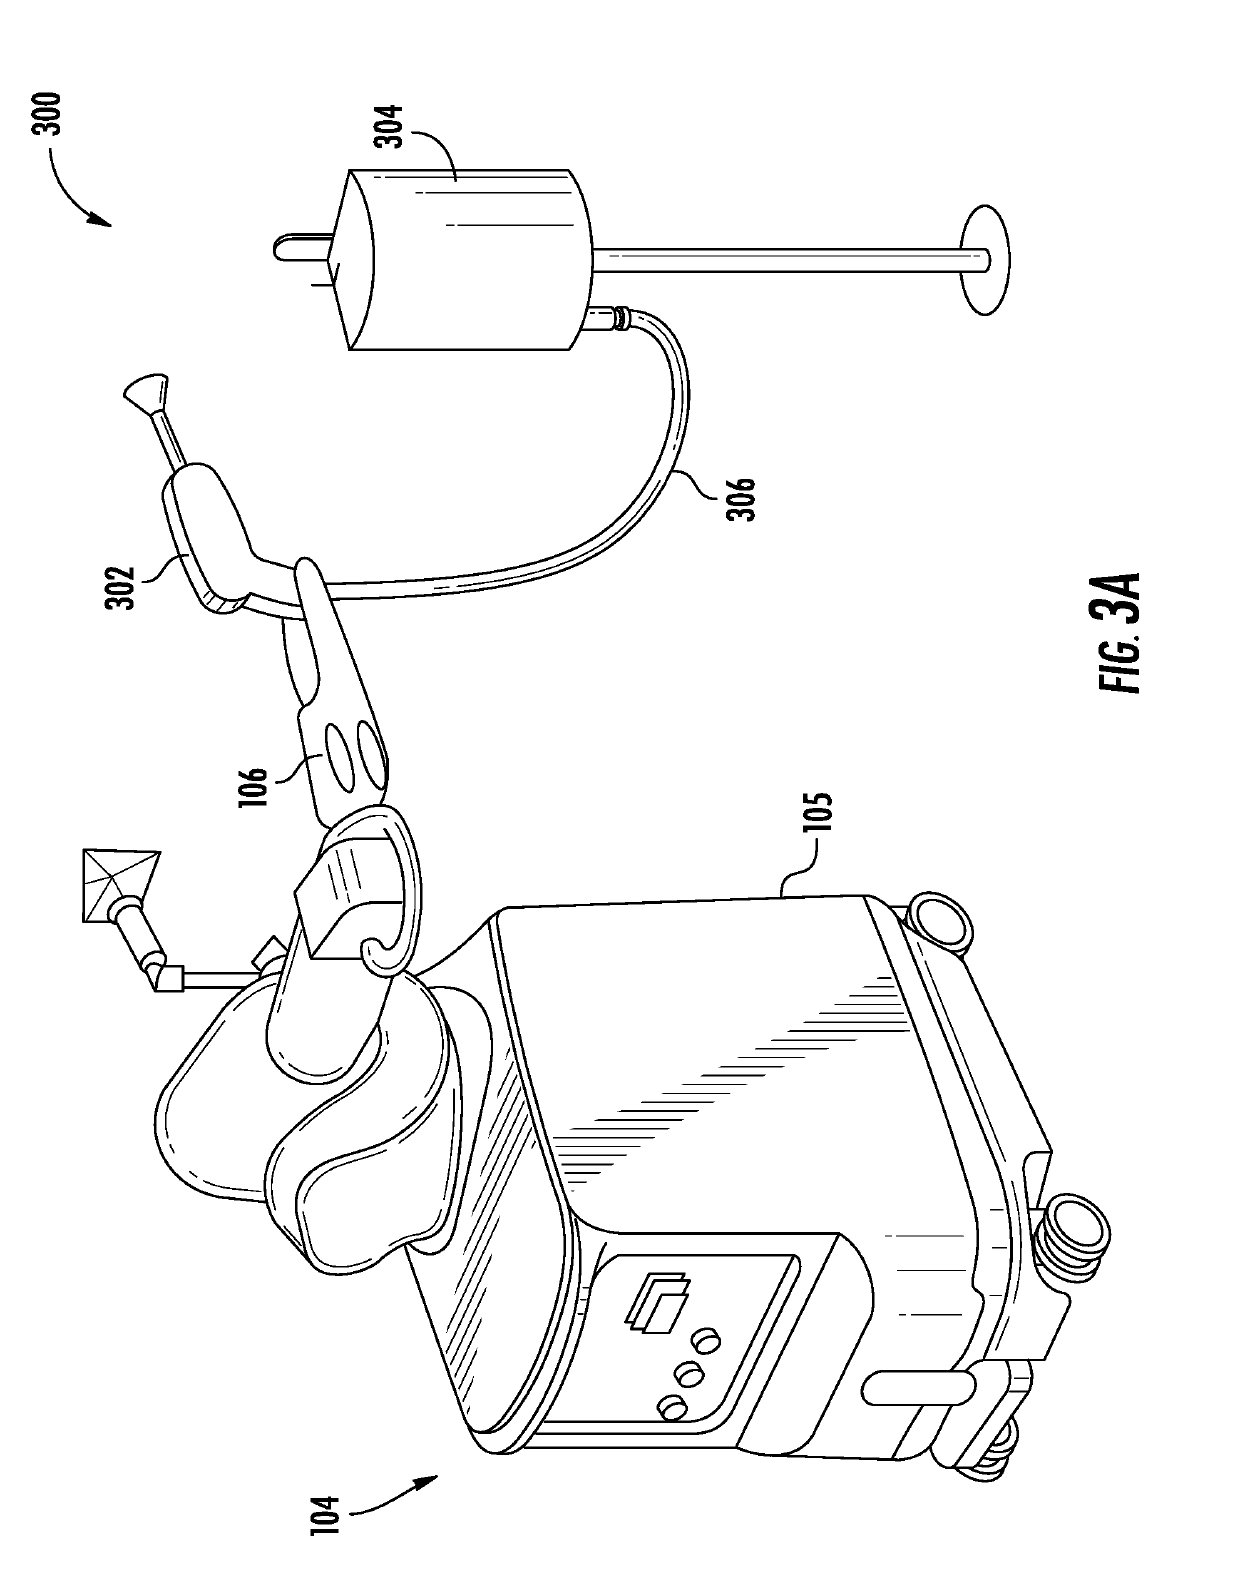 Systems and methods for robotic infection treatment of a prosthesis